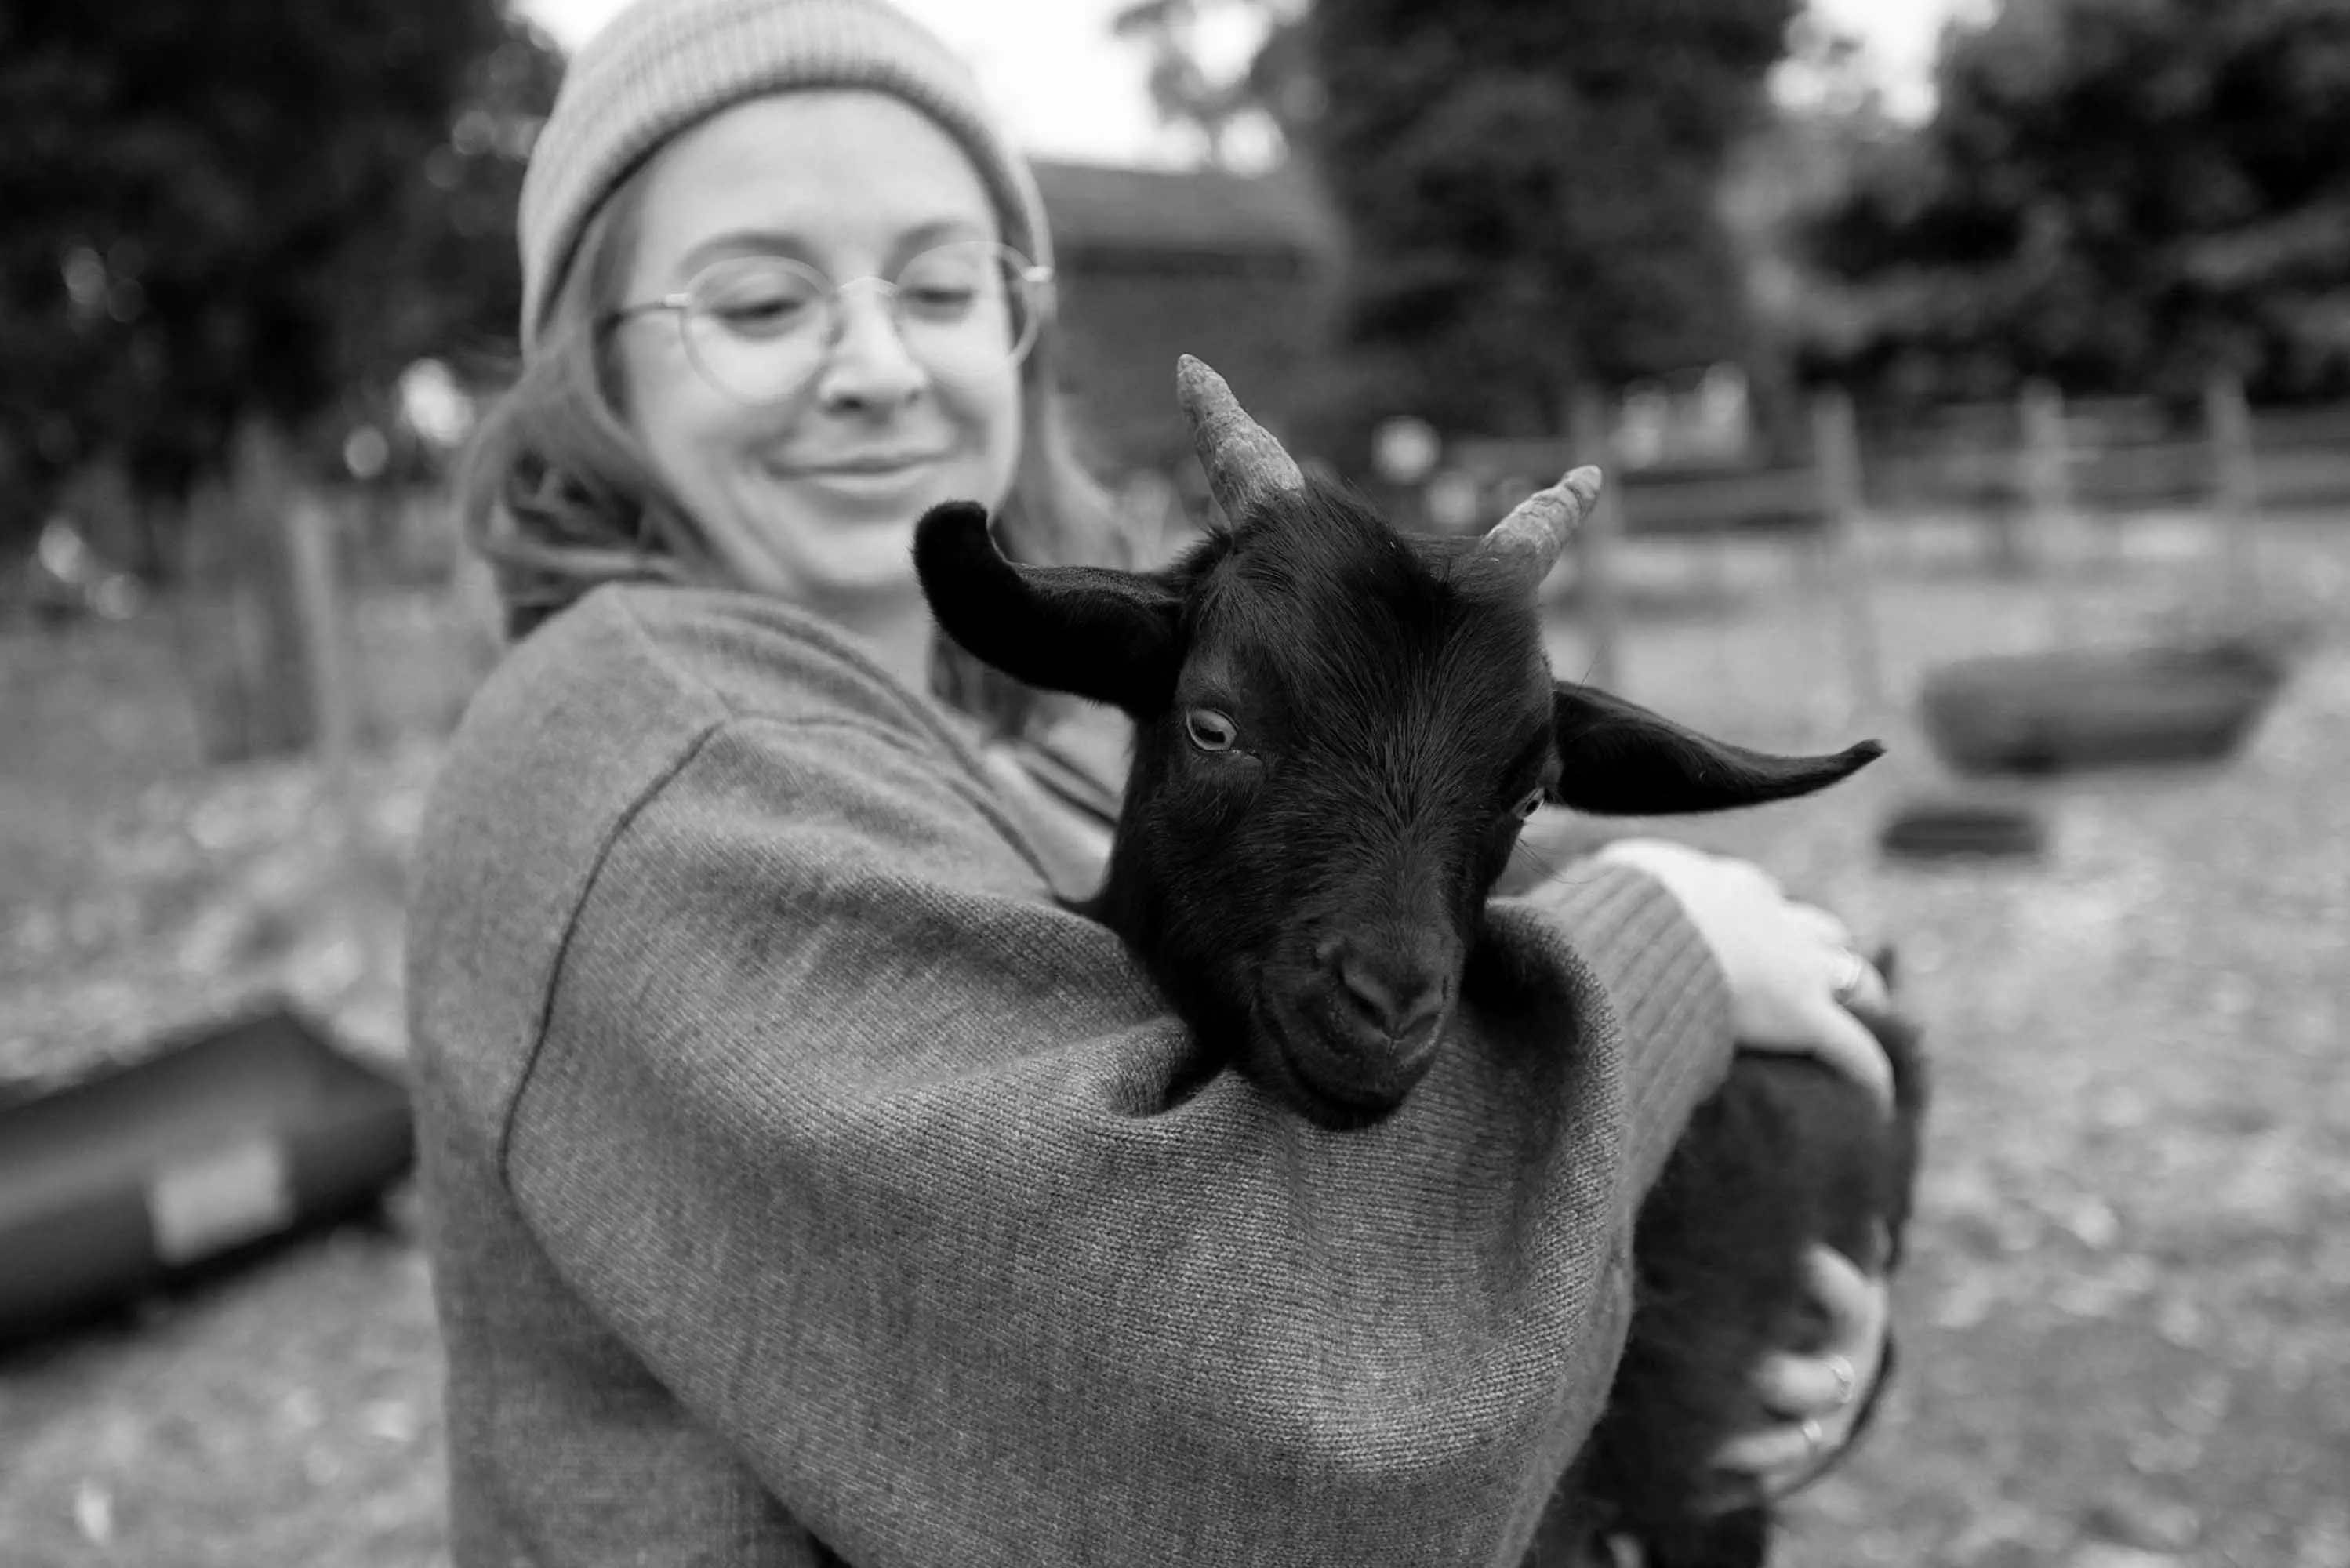 A woman wearing glasses and a knitted beanie holds a small, black goat.